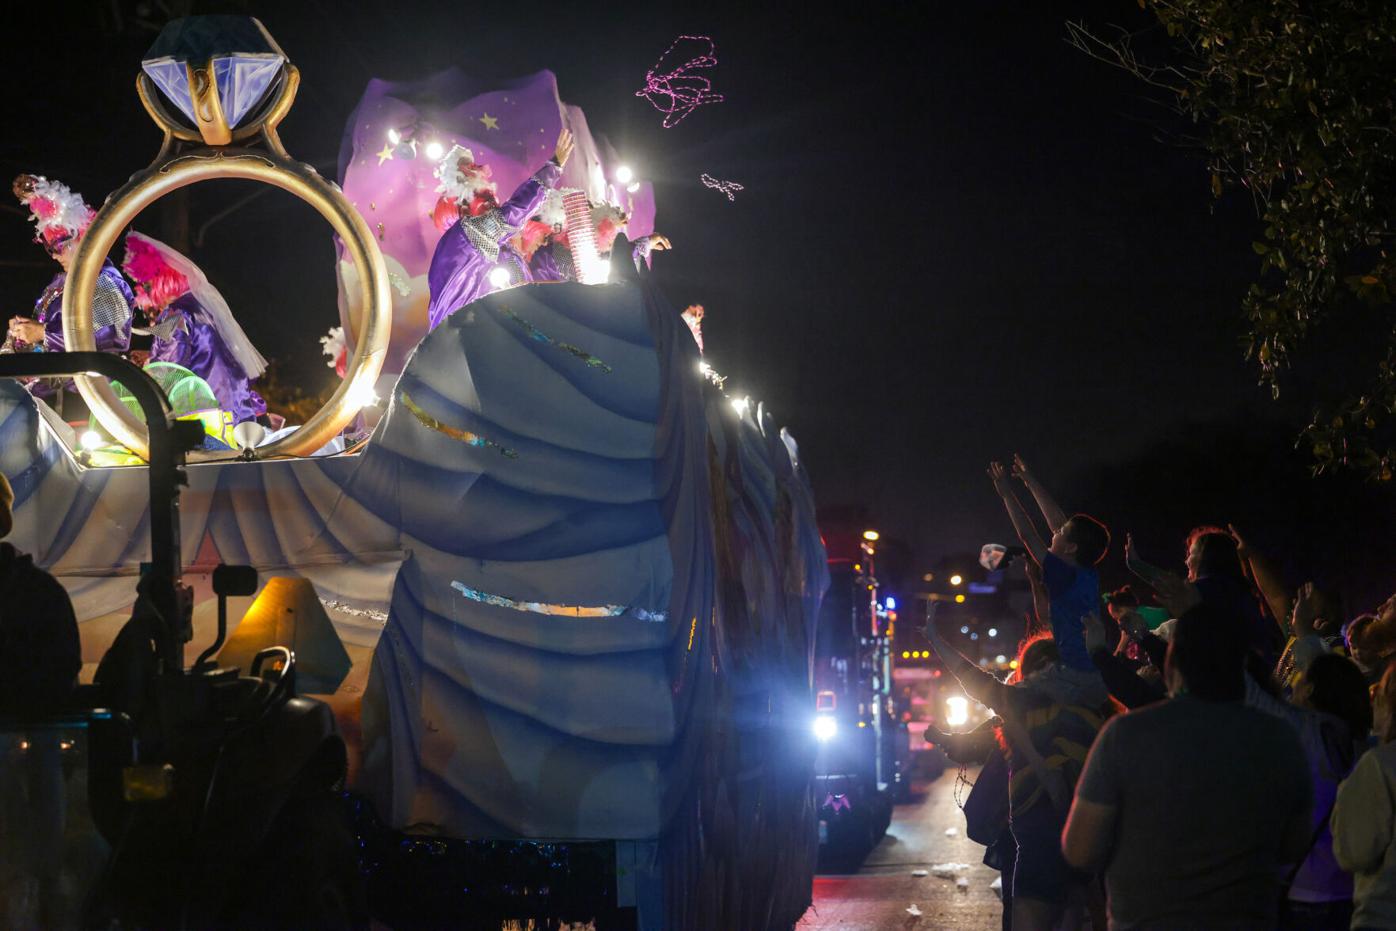 Photos: The Krewe of Isis parades through the streets of Kenner